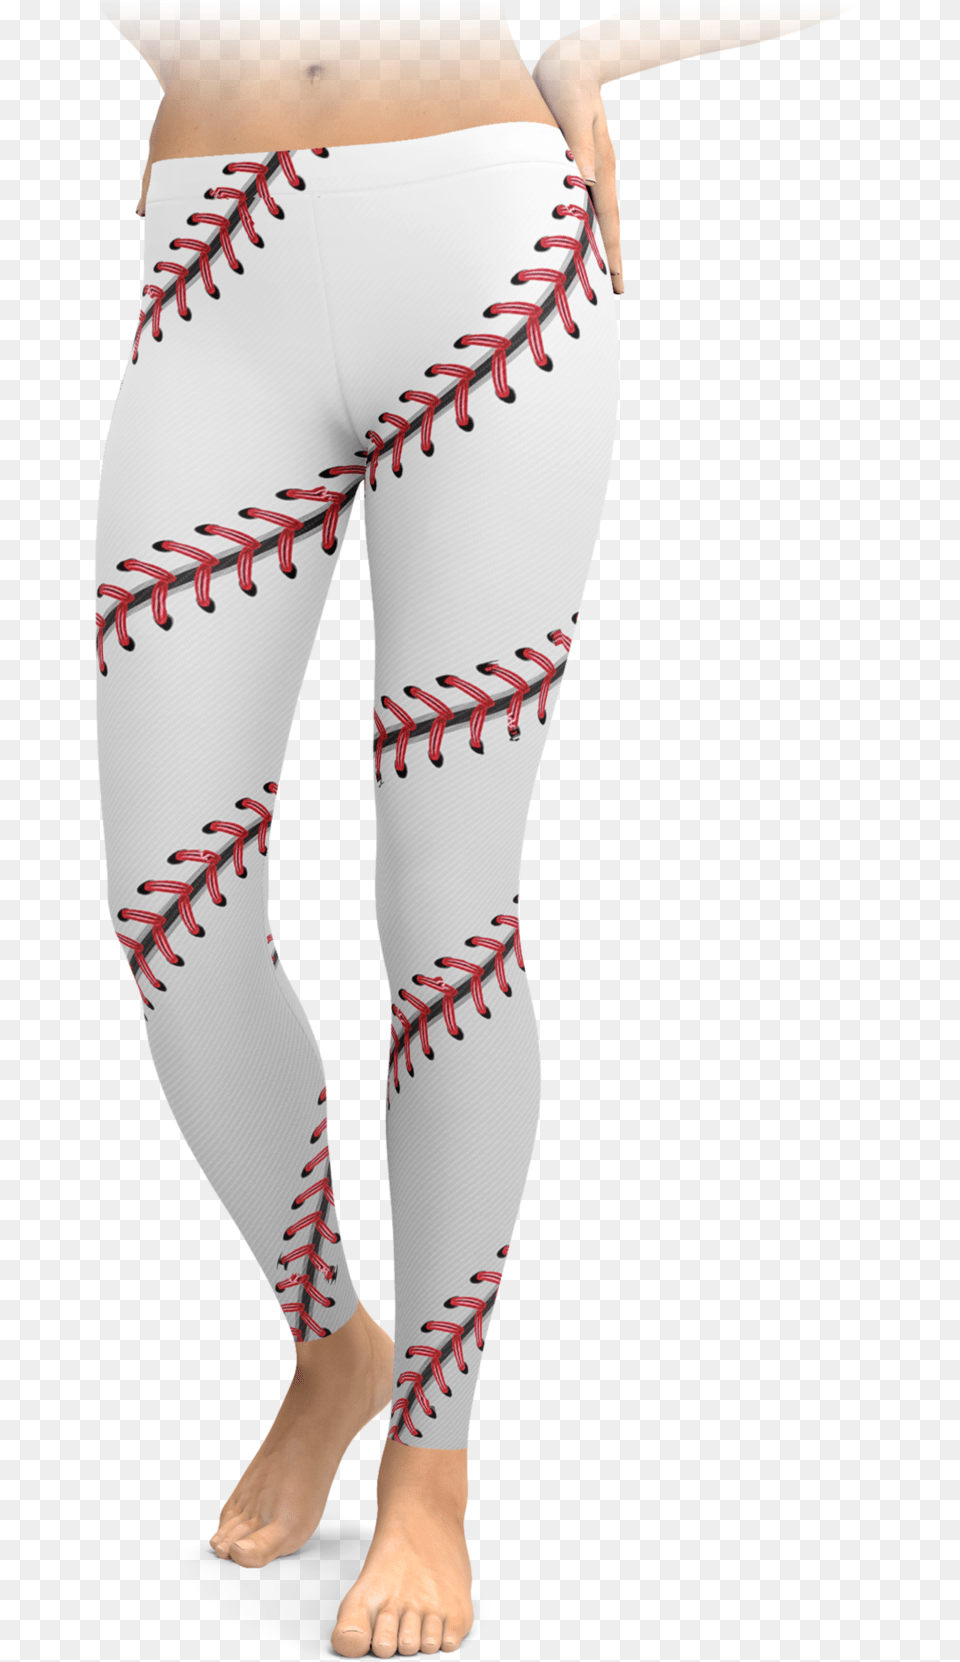 Shorts And Fish Net Stockings, Clothing, Hosiery, Tights, Adult Png